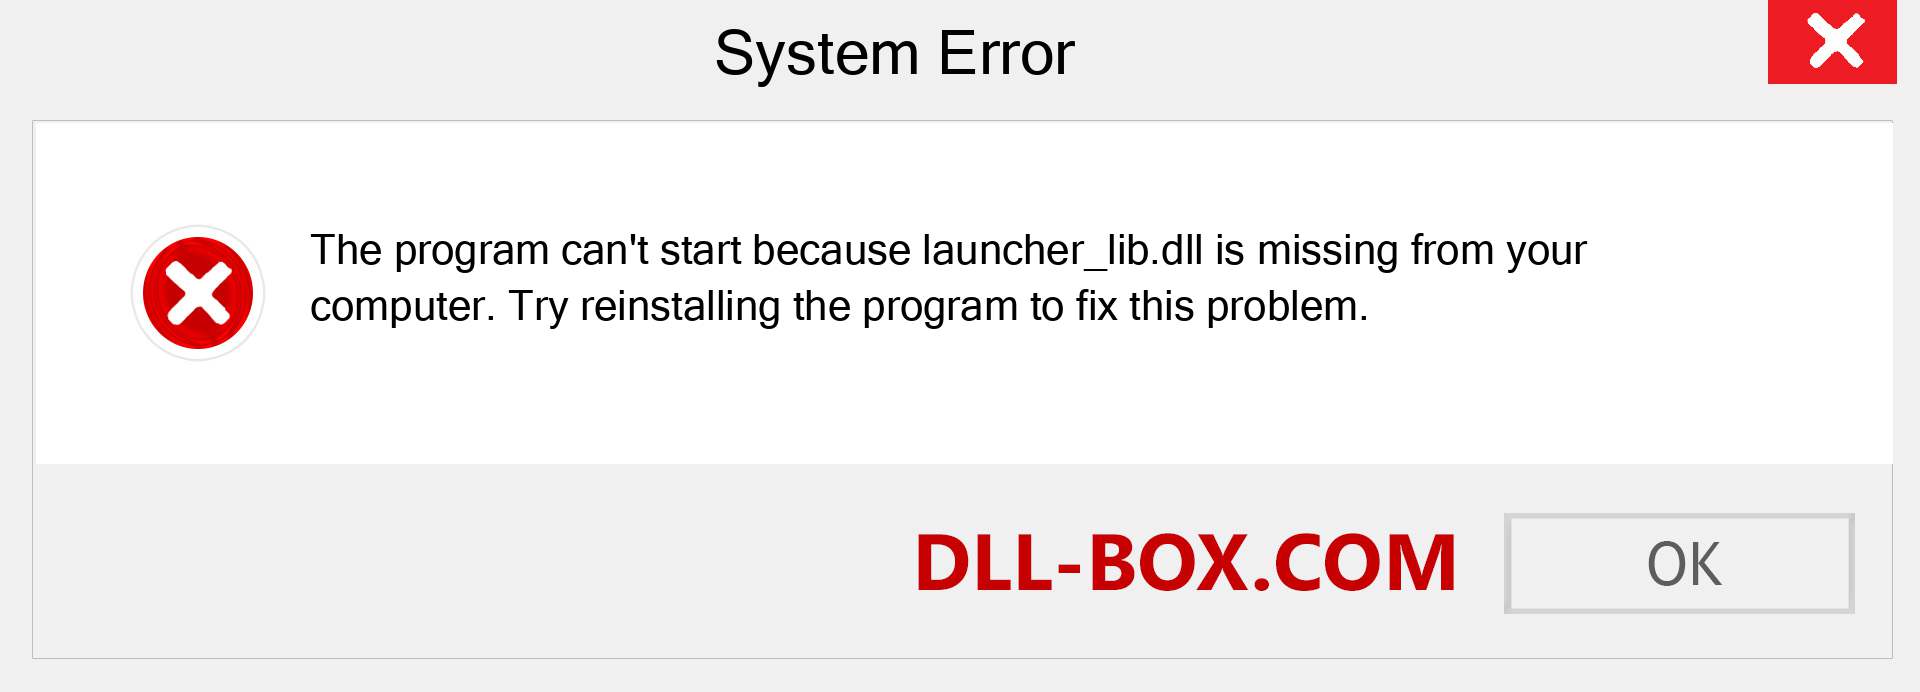  launcher_lib.dll file is missing?. Download for Windows 7, 8, 10 - Fix  launcher_lib dll Missing Error on Windows, photos, images